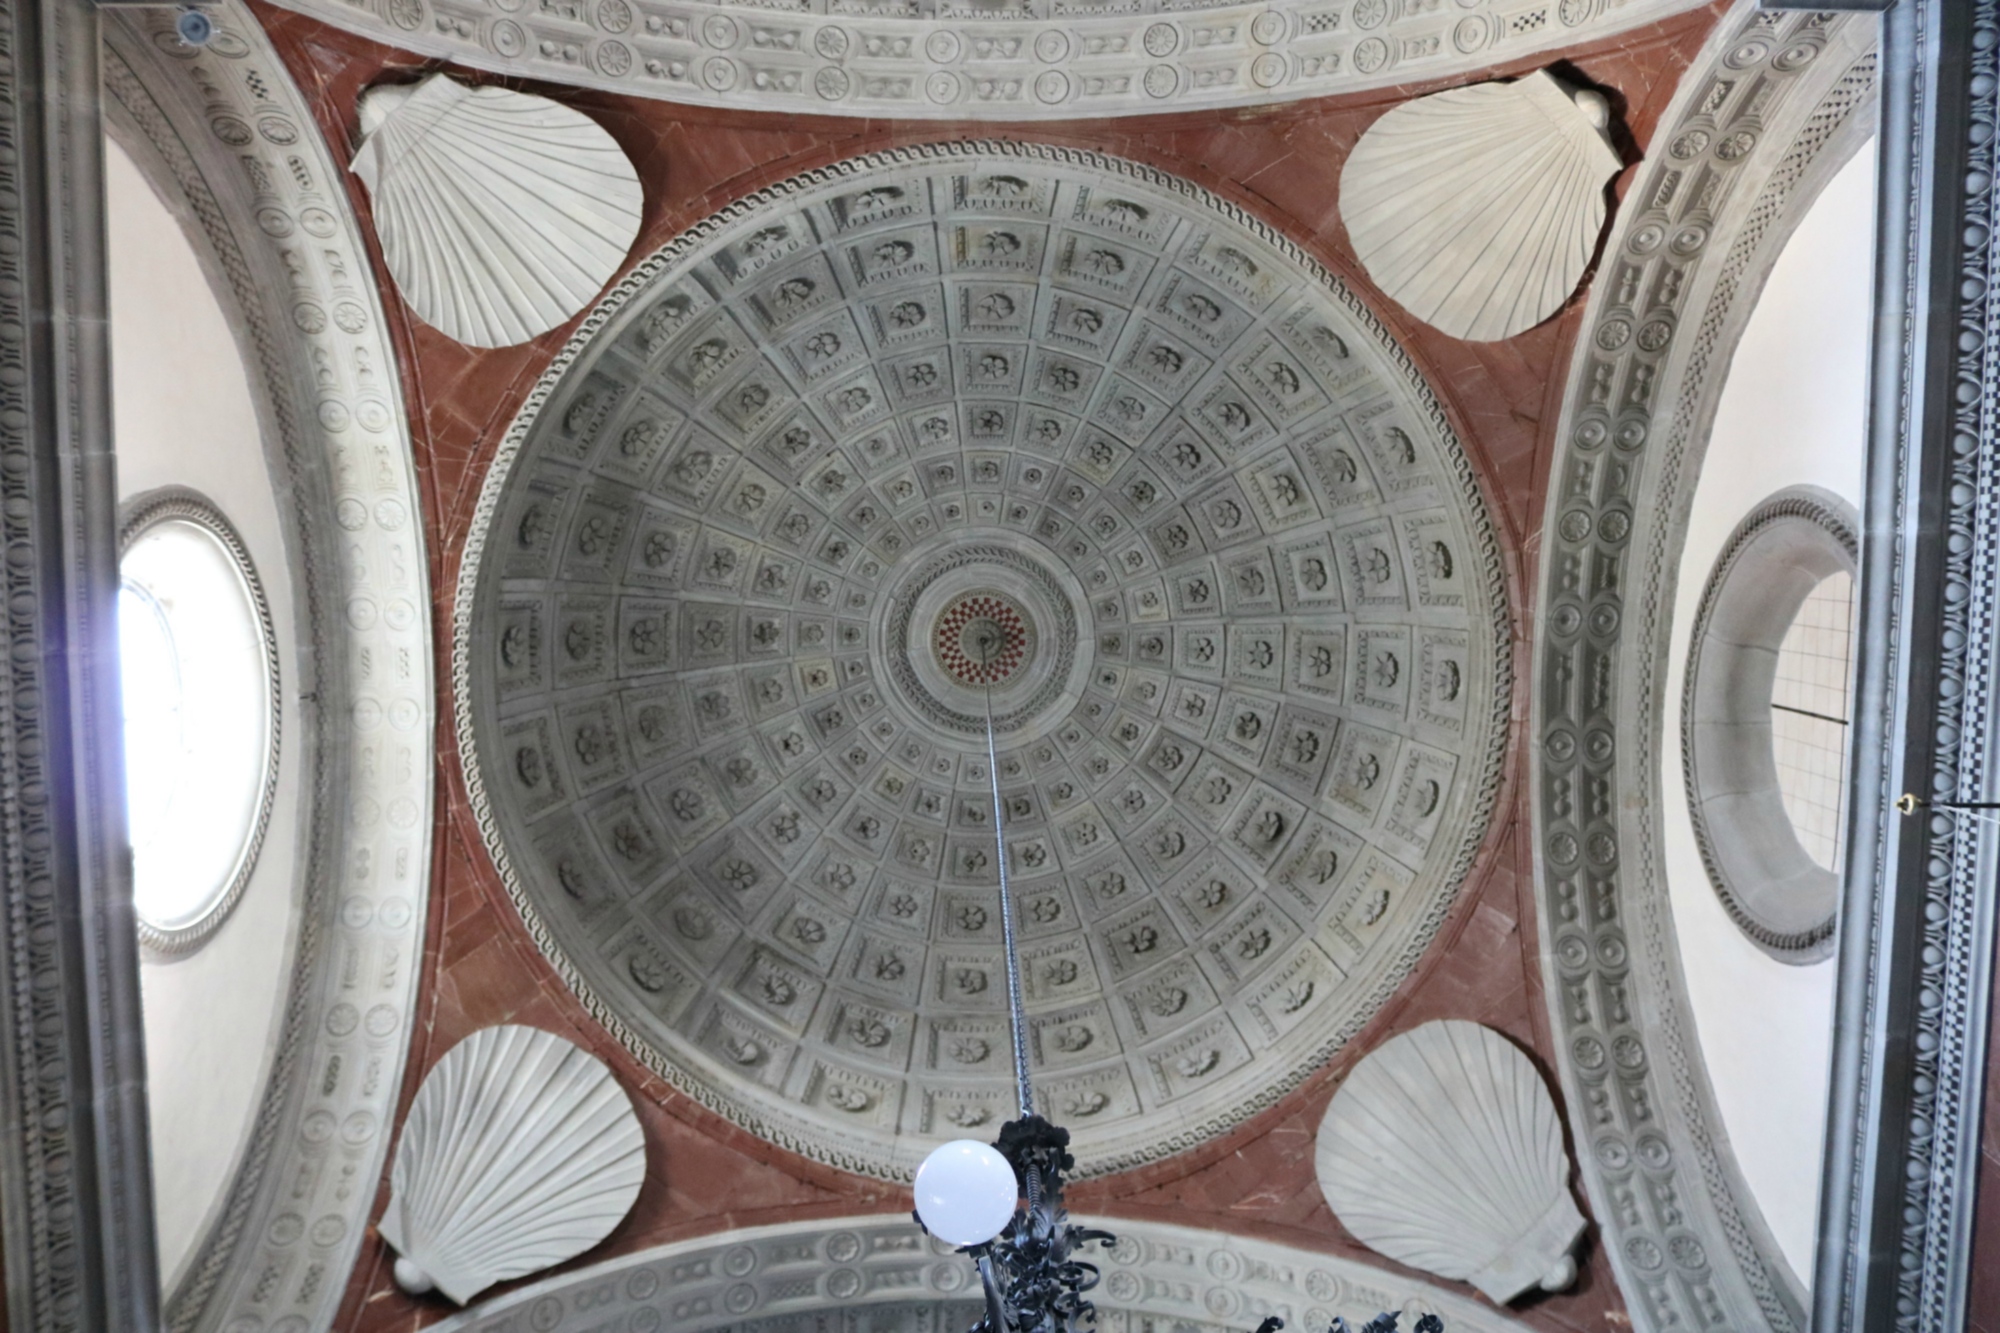 The dome of the church